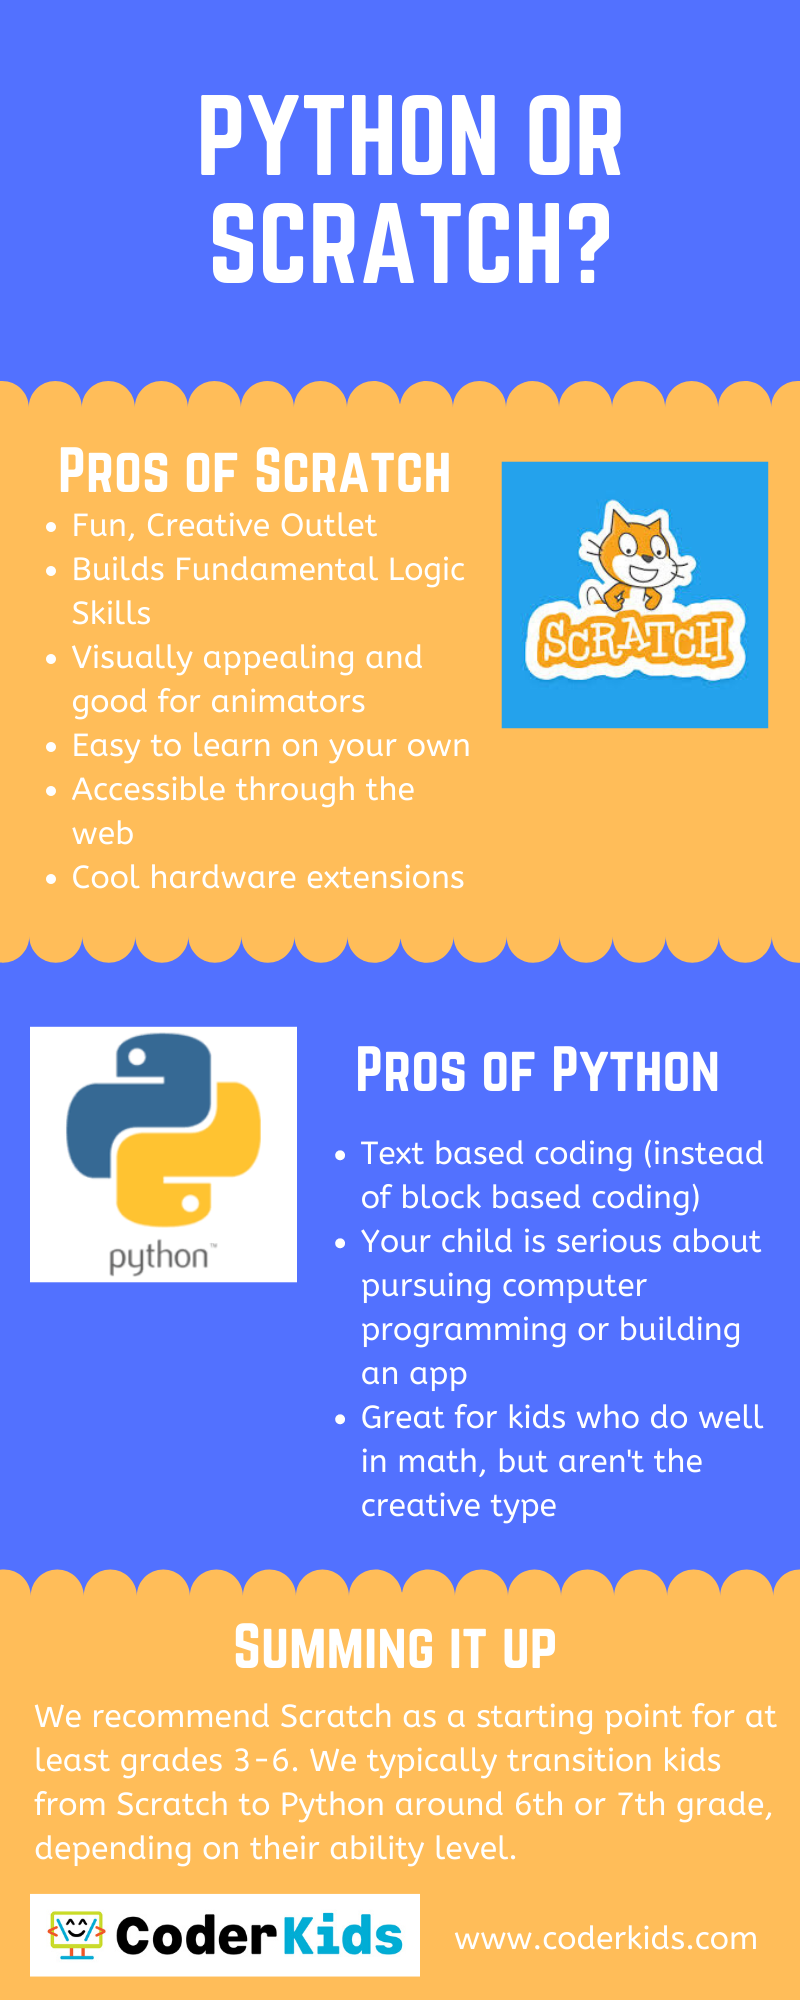 Should kids learn Scratch or Python?